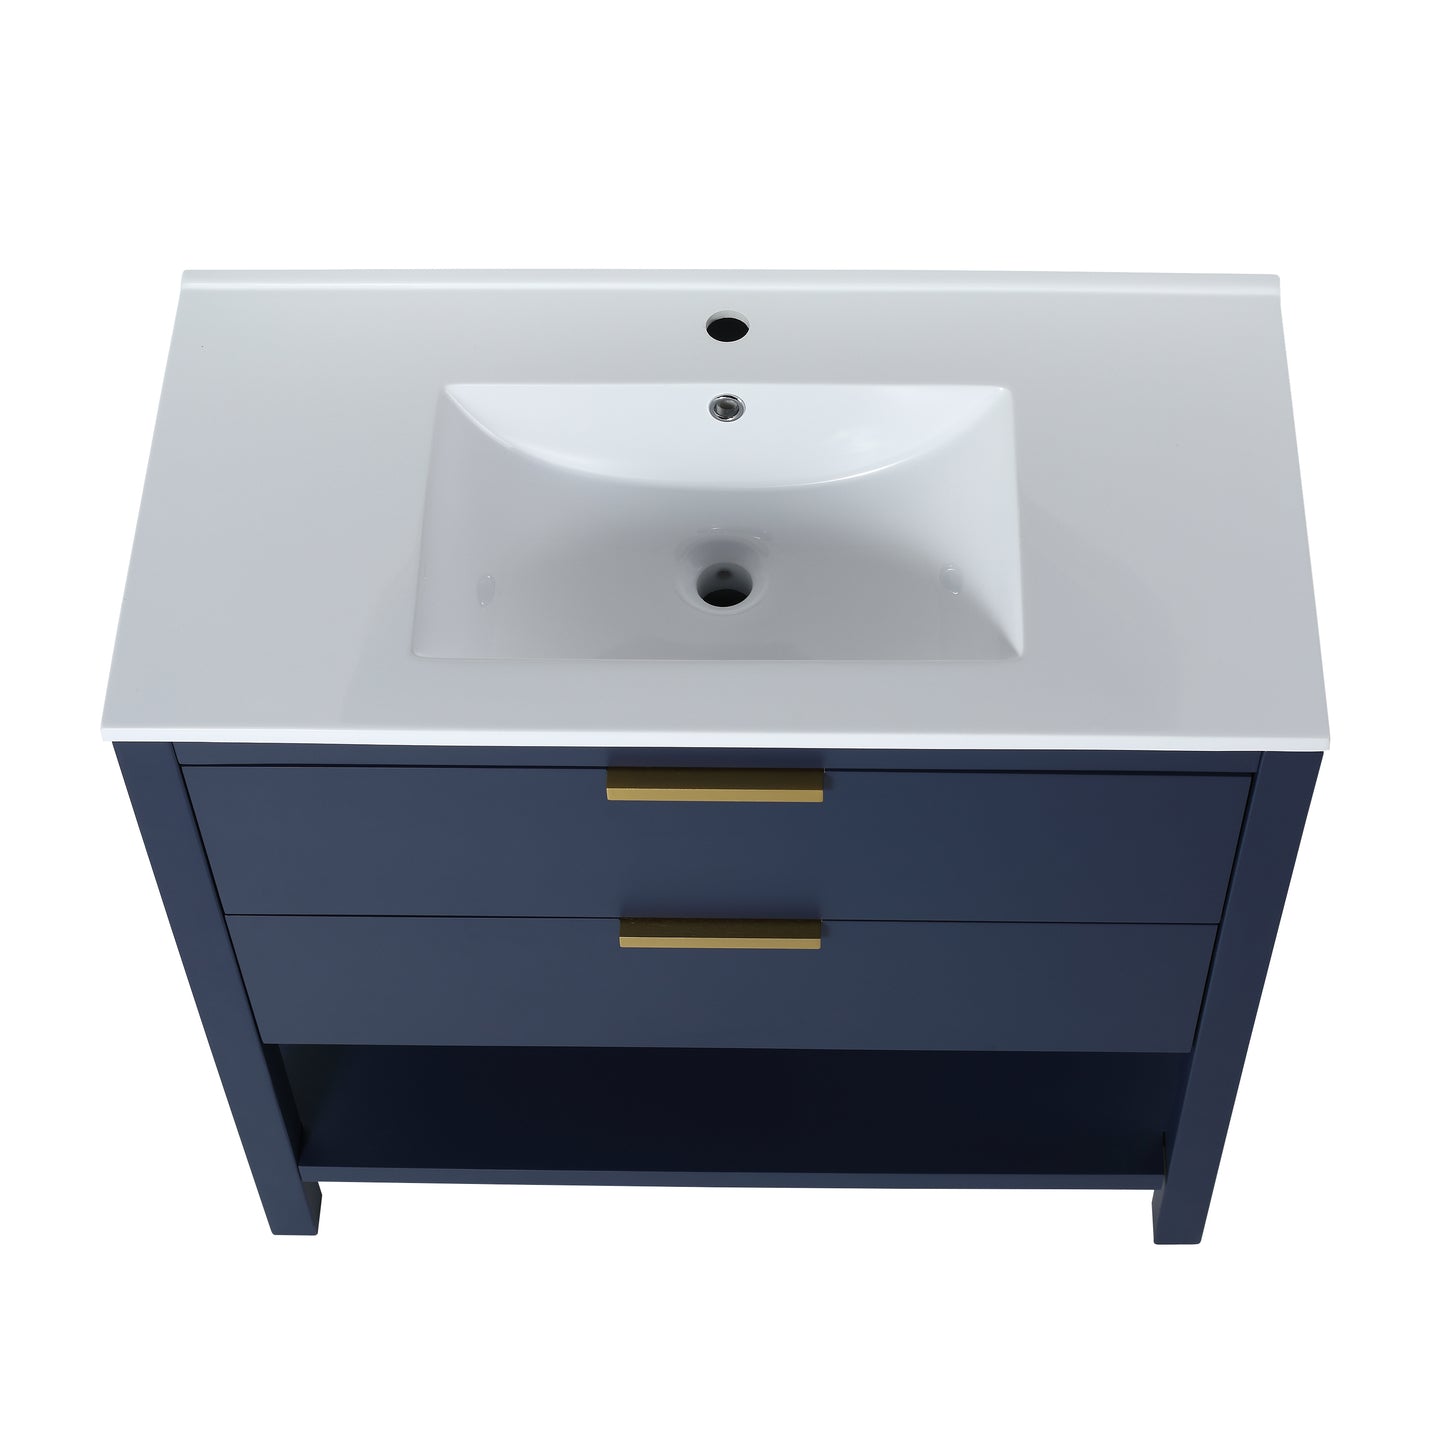 36 Inch Freestanding Bathroom Vanity Plywood With 2 Drawers,36x18